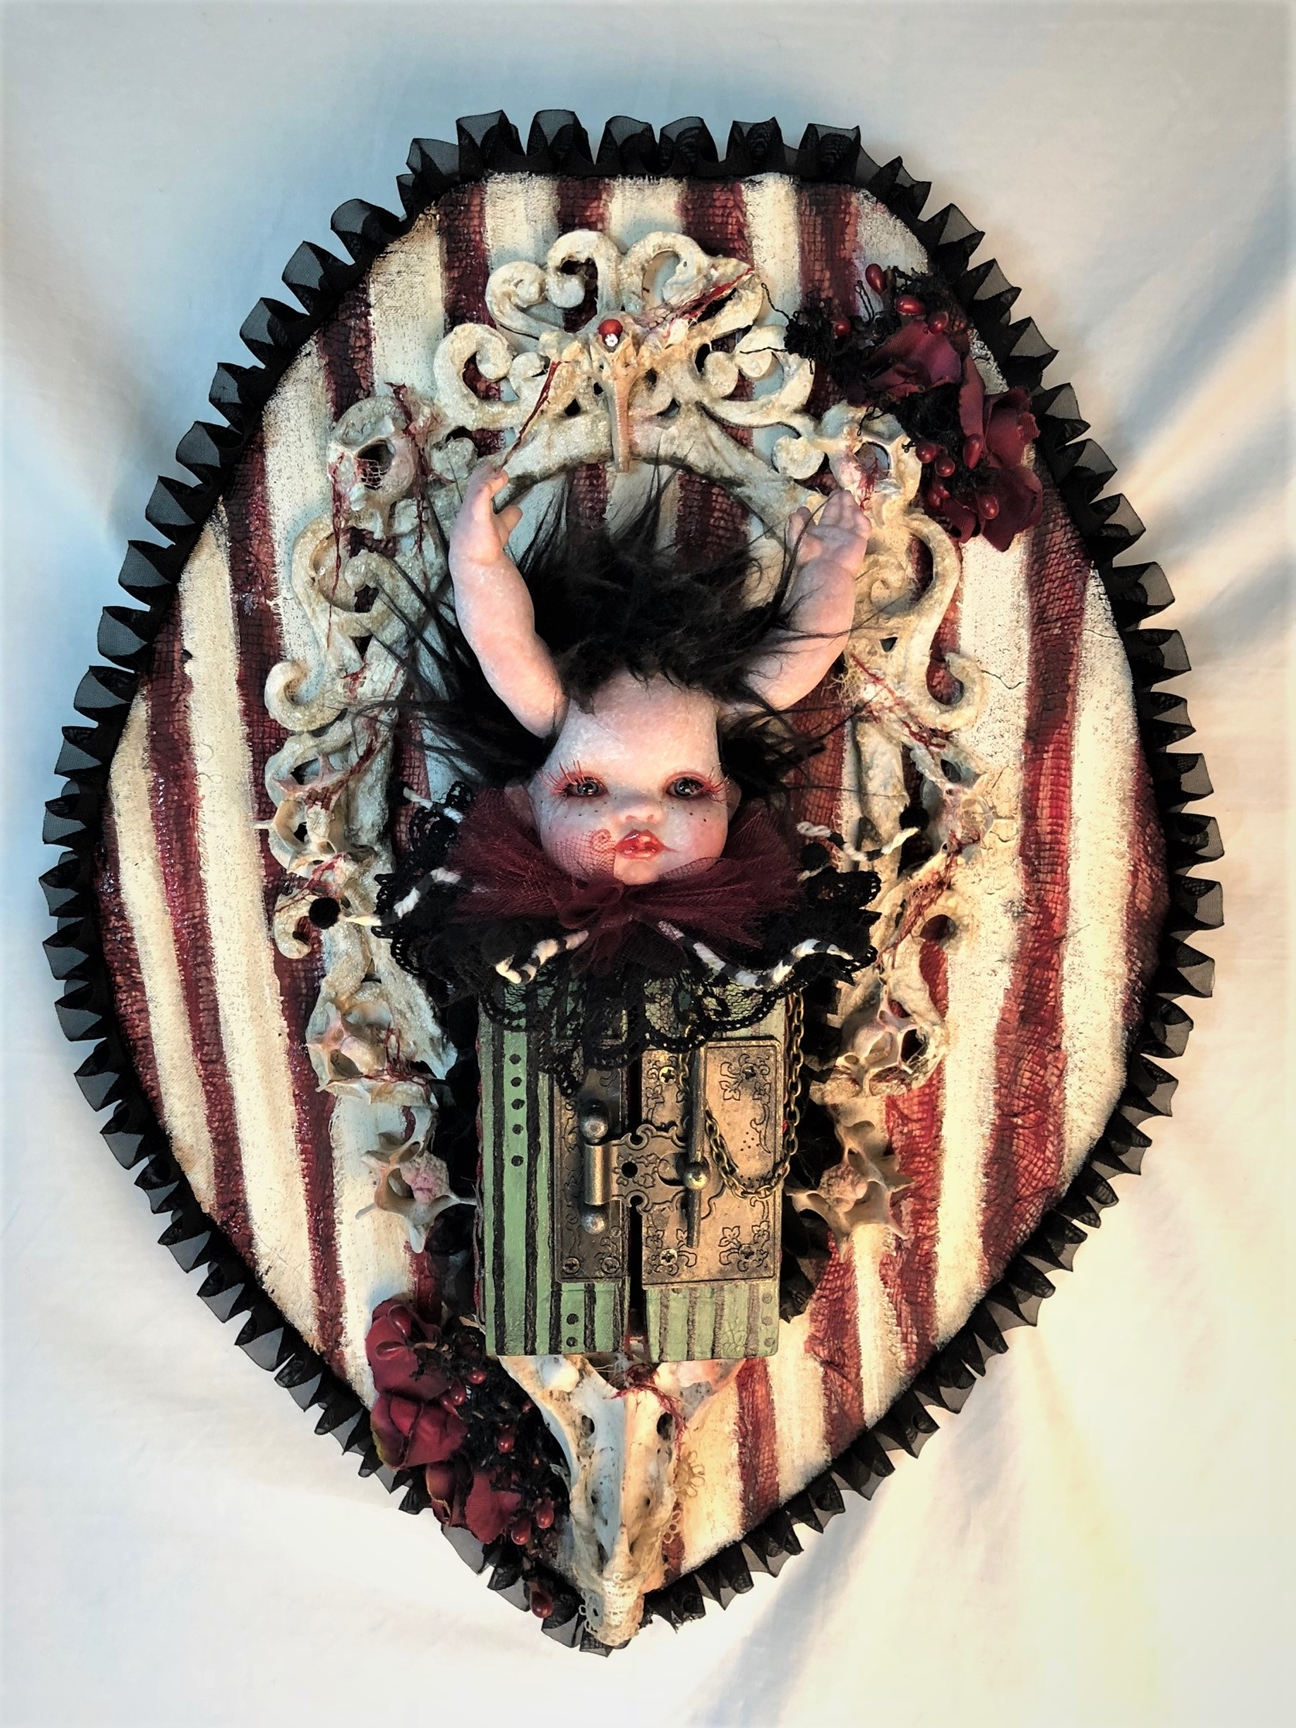 gothic red black and white mixed media assemblage artpiece plaque with a repaint porcelain babydoll head with arms for horns, striped closed cabinet, surrounded by vertebrae on textile covered wooden board